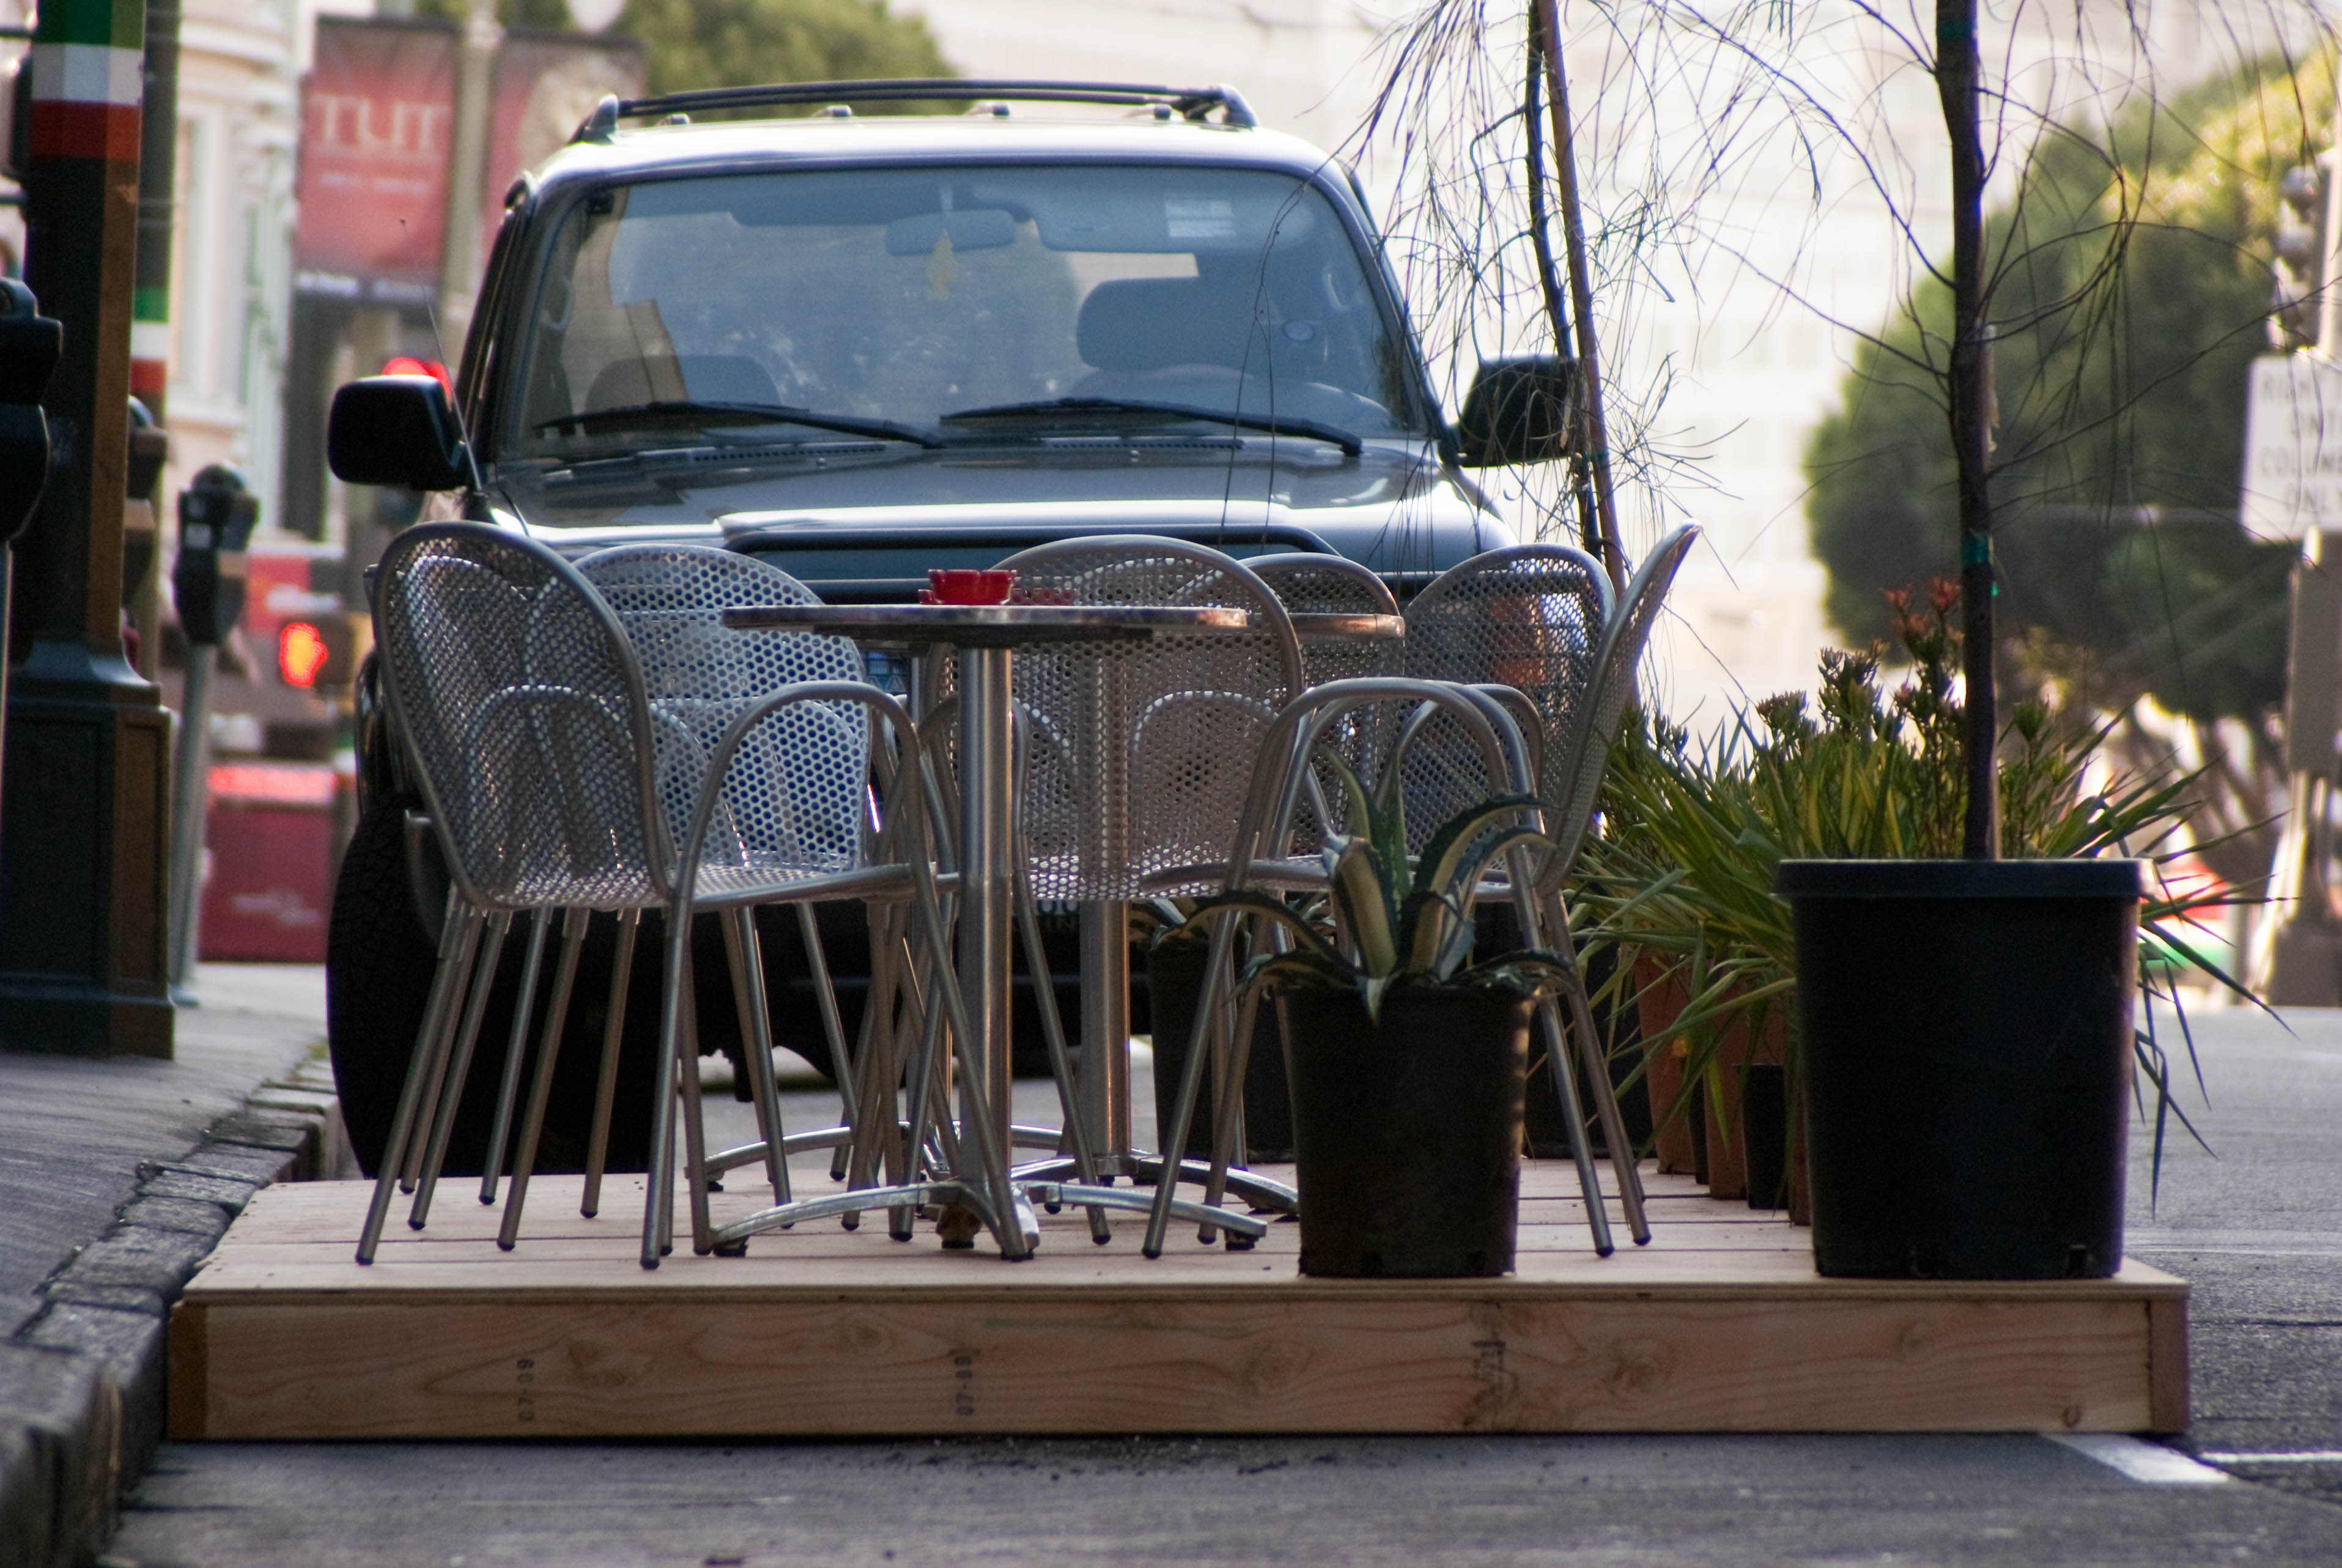 09377 Seating for nine at Caffe Roma Park(ing) Day spot in front of seating for four